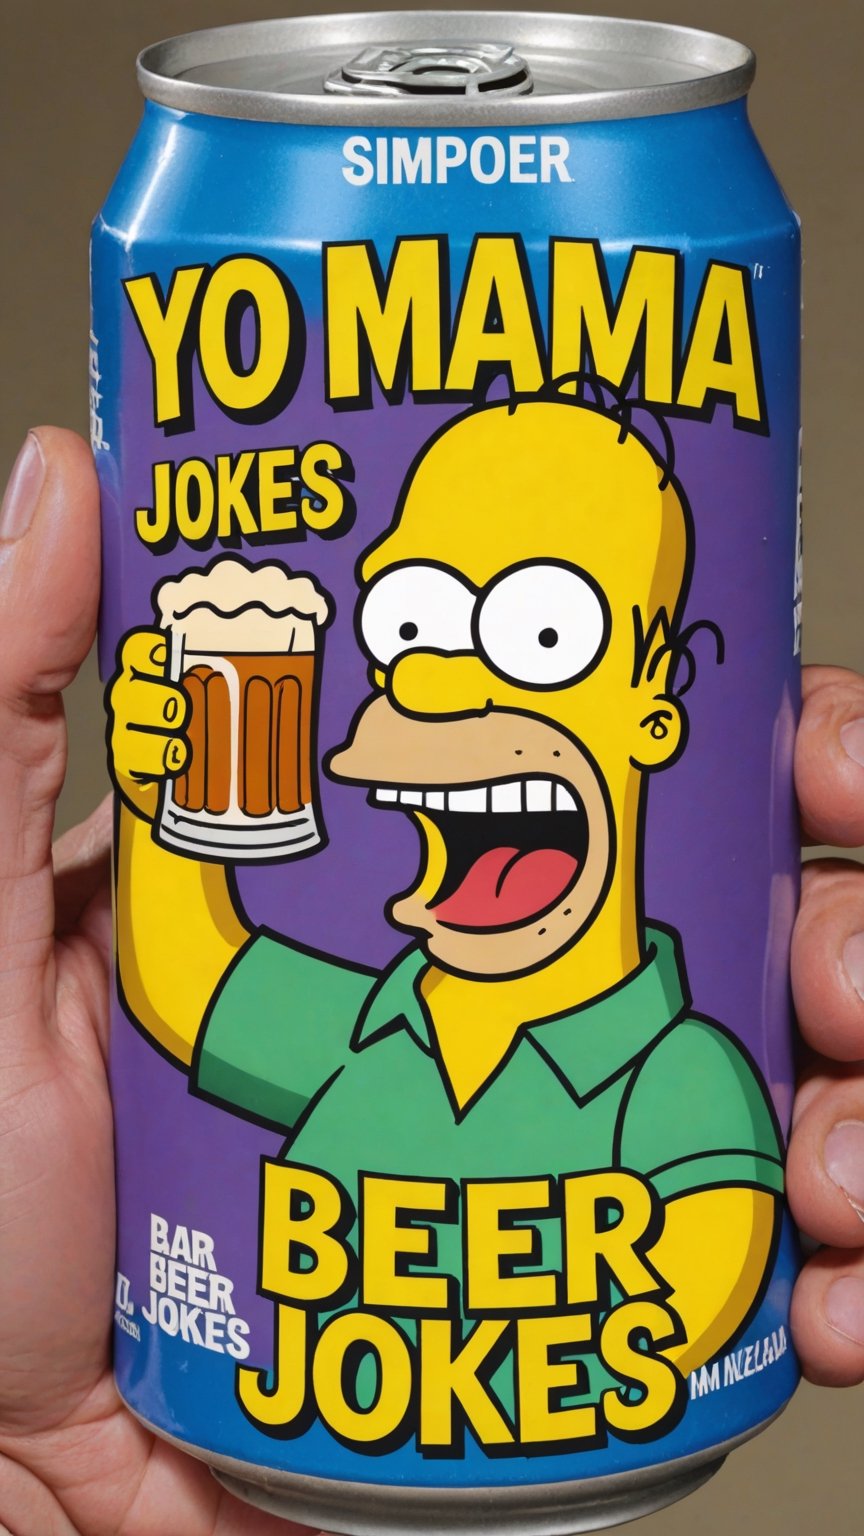 photo of Homer Simpson as Joker in beer can with text that says "yo mama jokes"